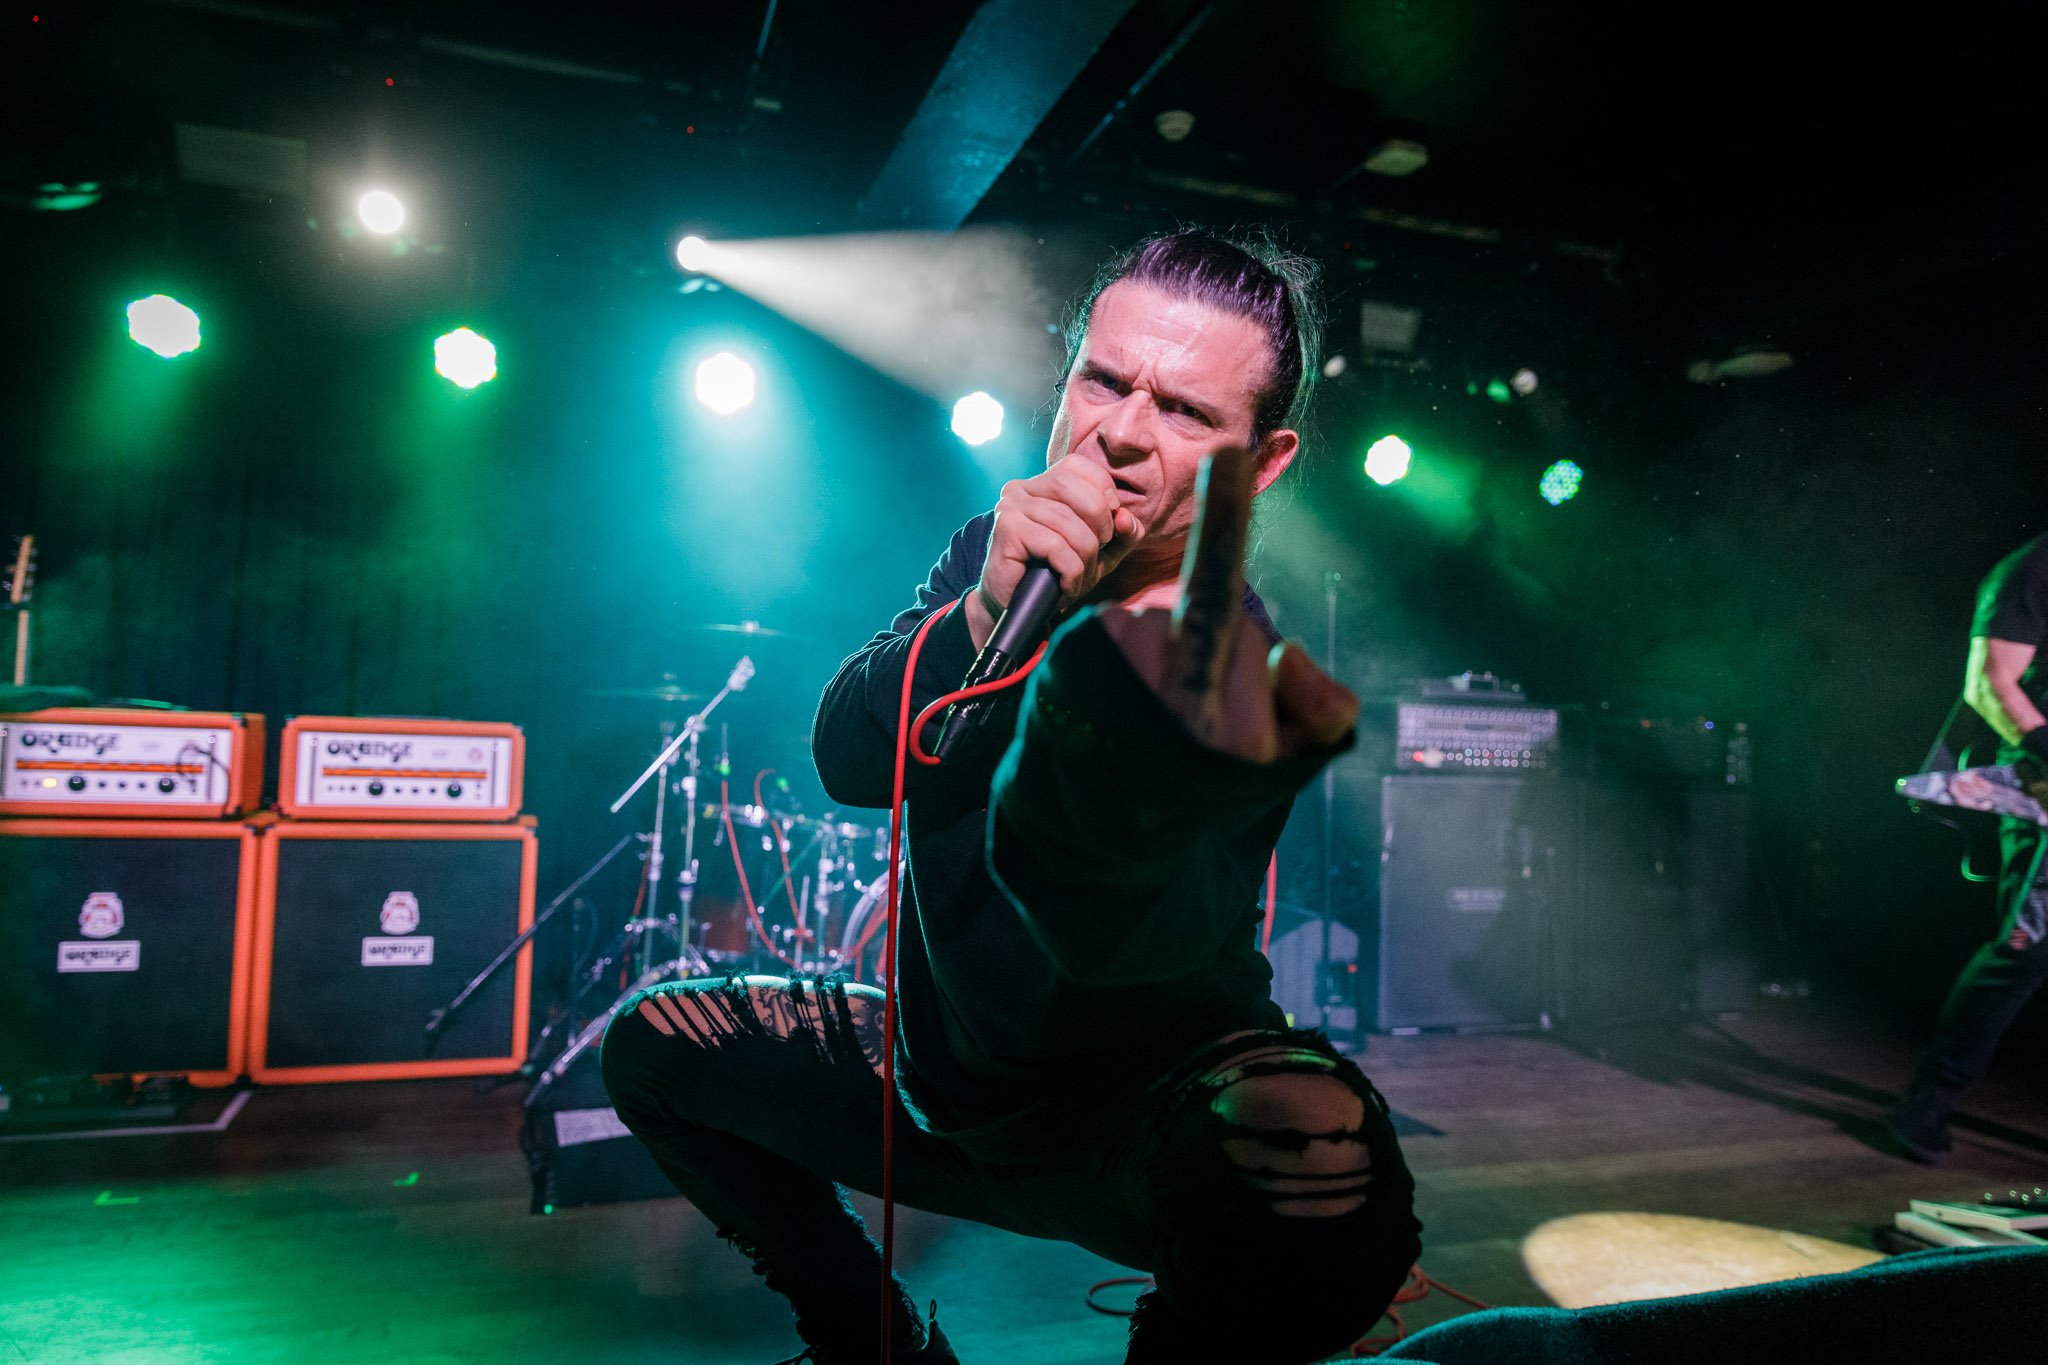 Life Of Agony at the Academy Club in Manchester on February 7th 